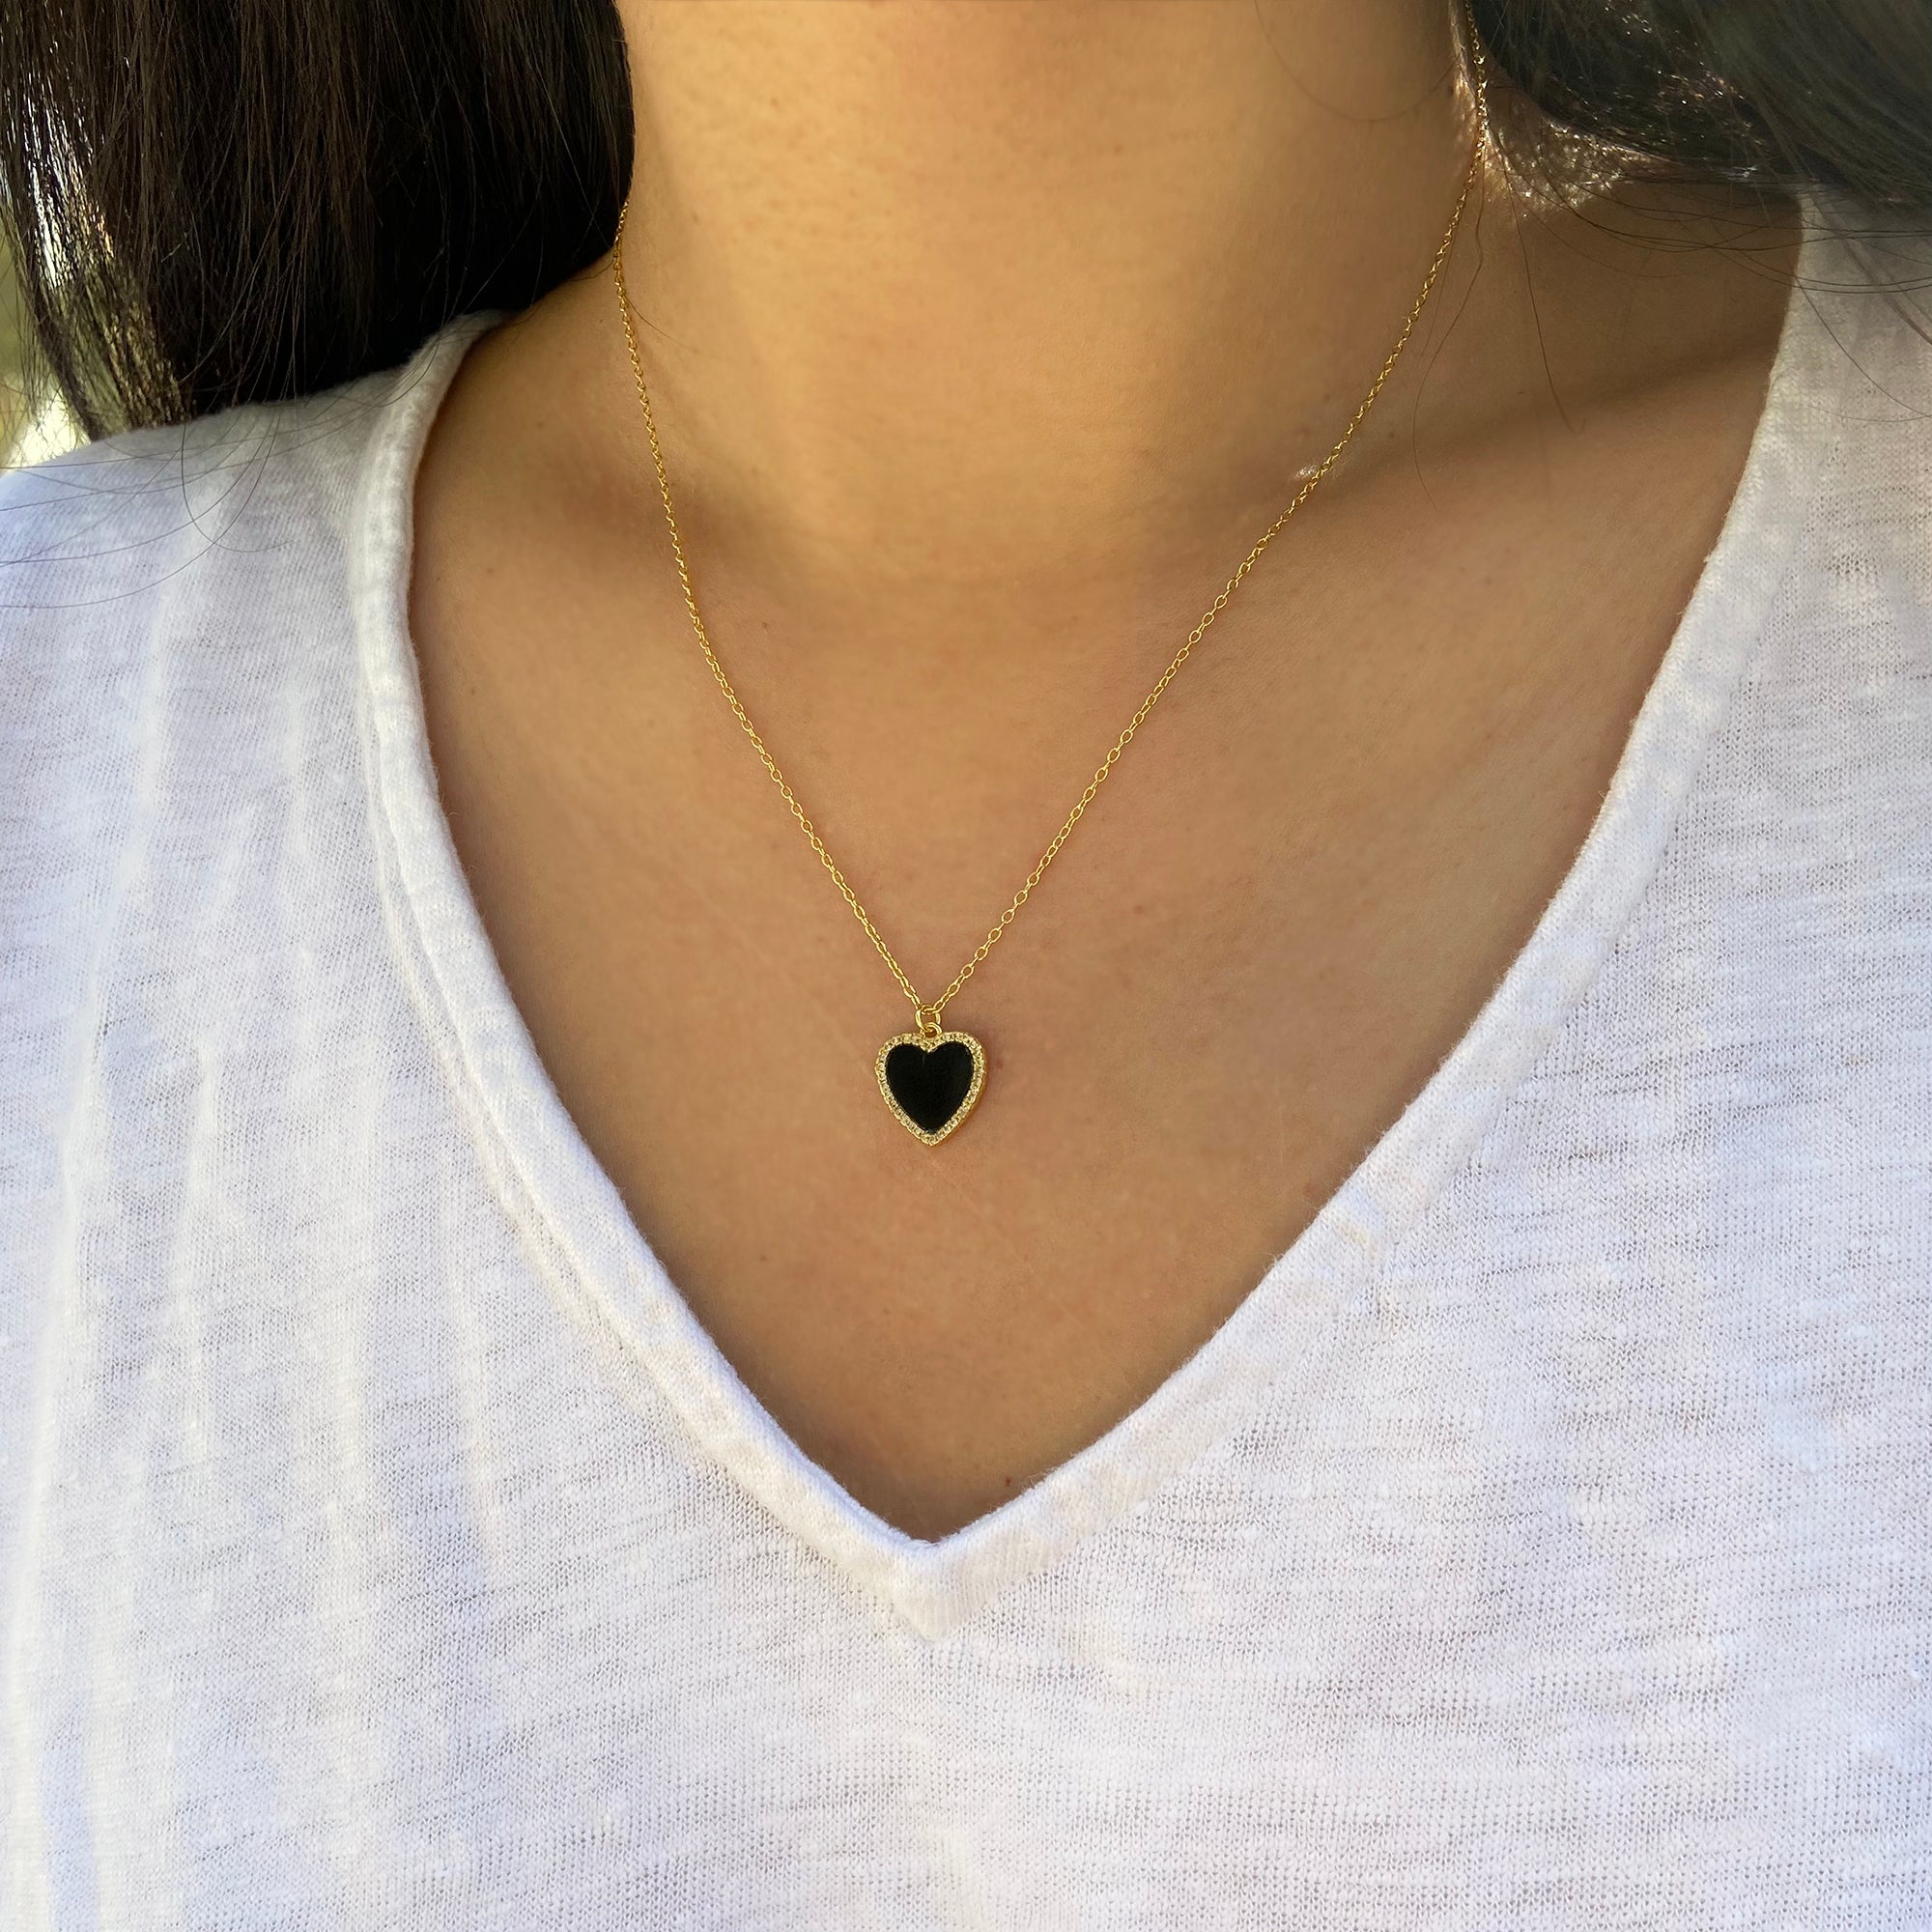 Black onyx heart necklace with crystals gold